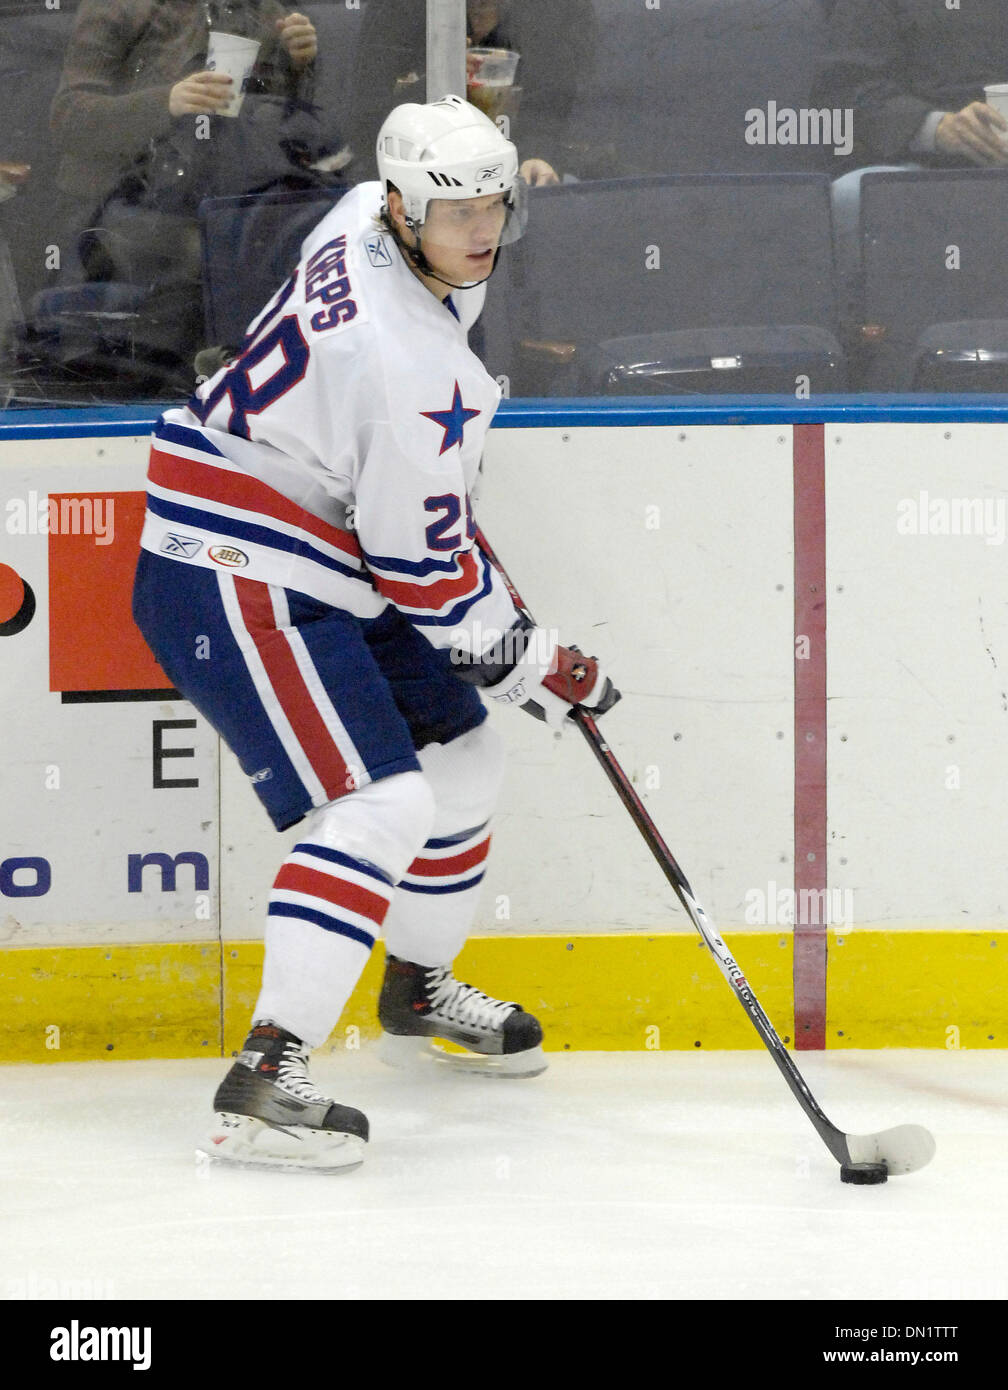 November 17, 2006: AHL - Rochester Kamil Kreps #28 in action against Manitoba. The Manitoba Canucks at Rochester Americans at the Blue Cross Arena at the War Memorial Auditorium. Rochester defeated Manitoba 4 to 3 in OT.(Credit Image: © Alan Schwartz/Cal Sport Media) Stock Photo